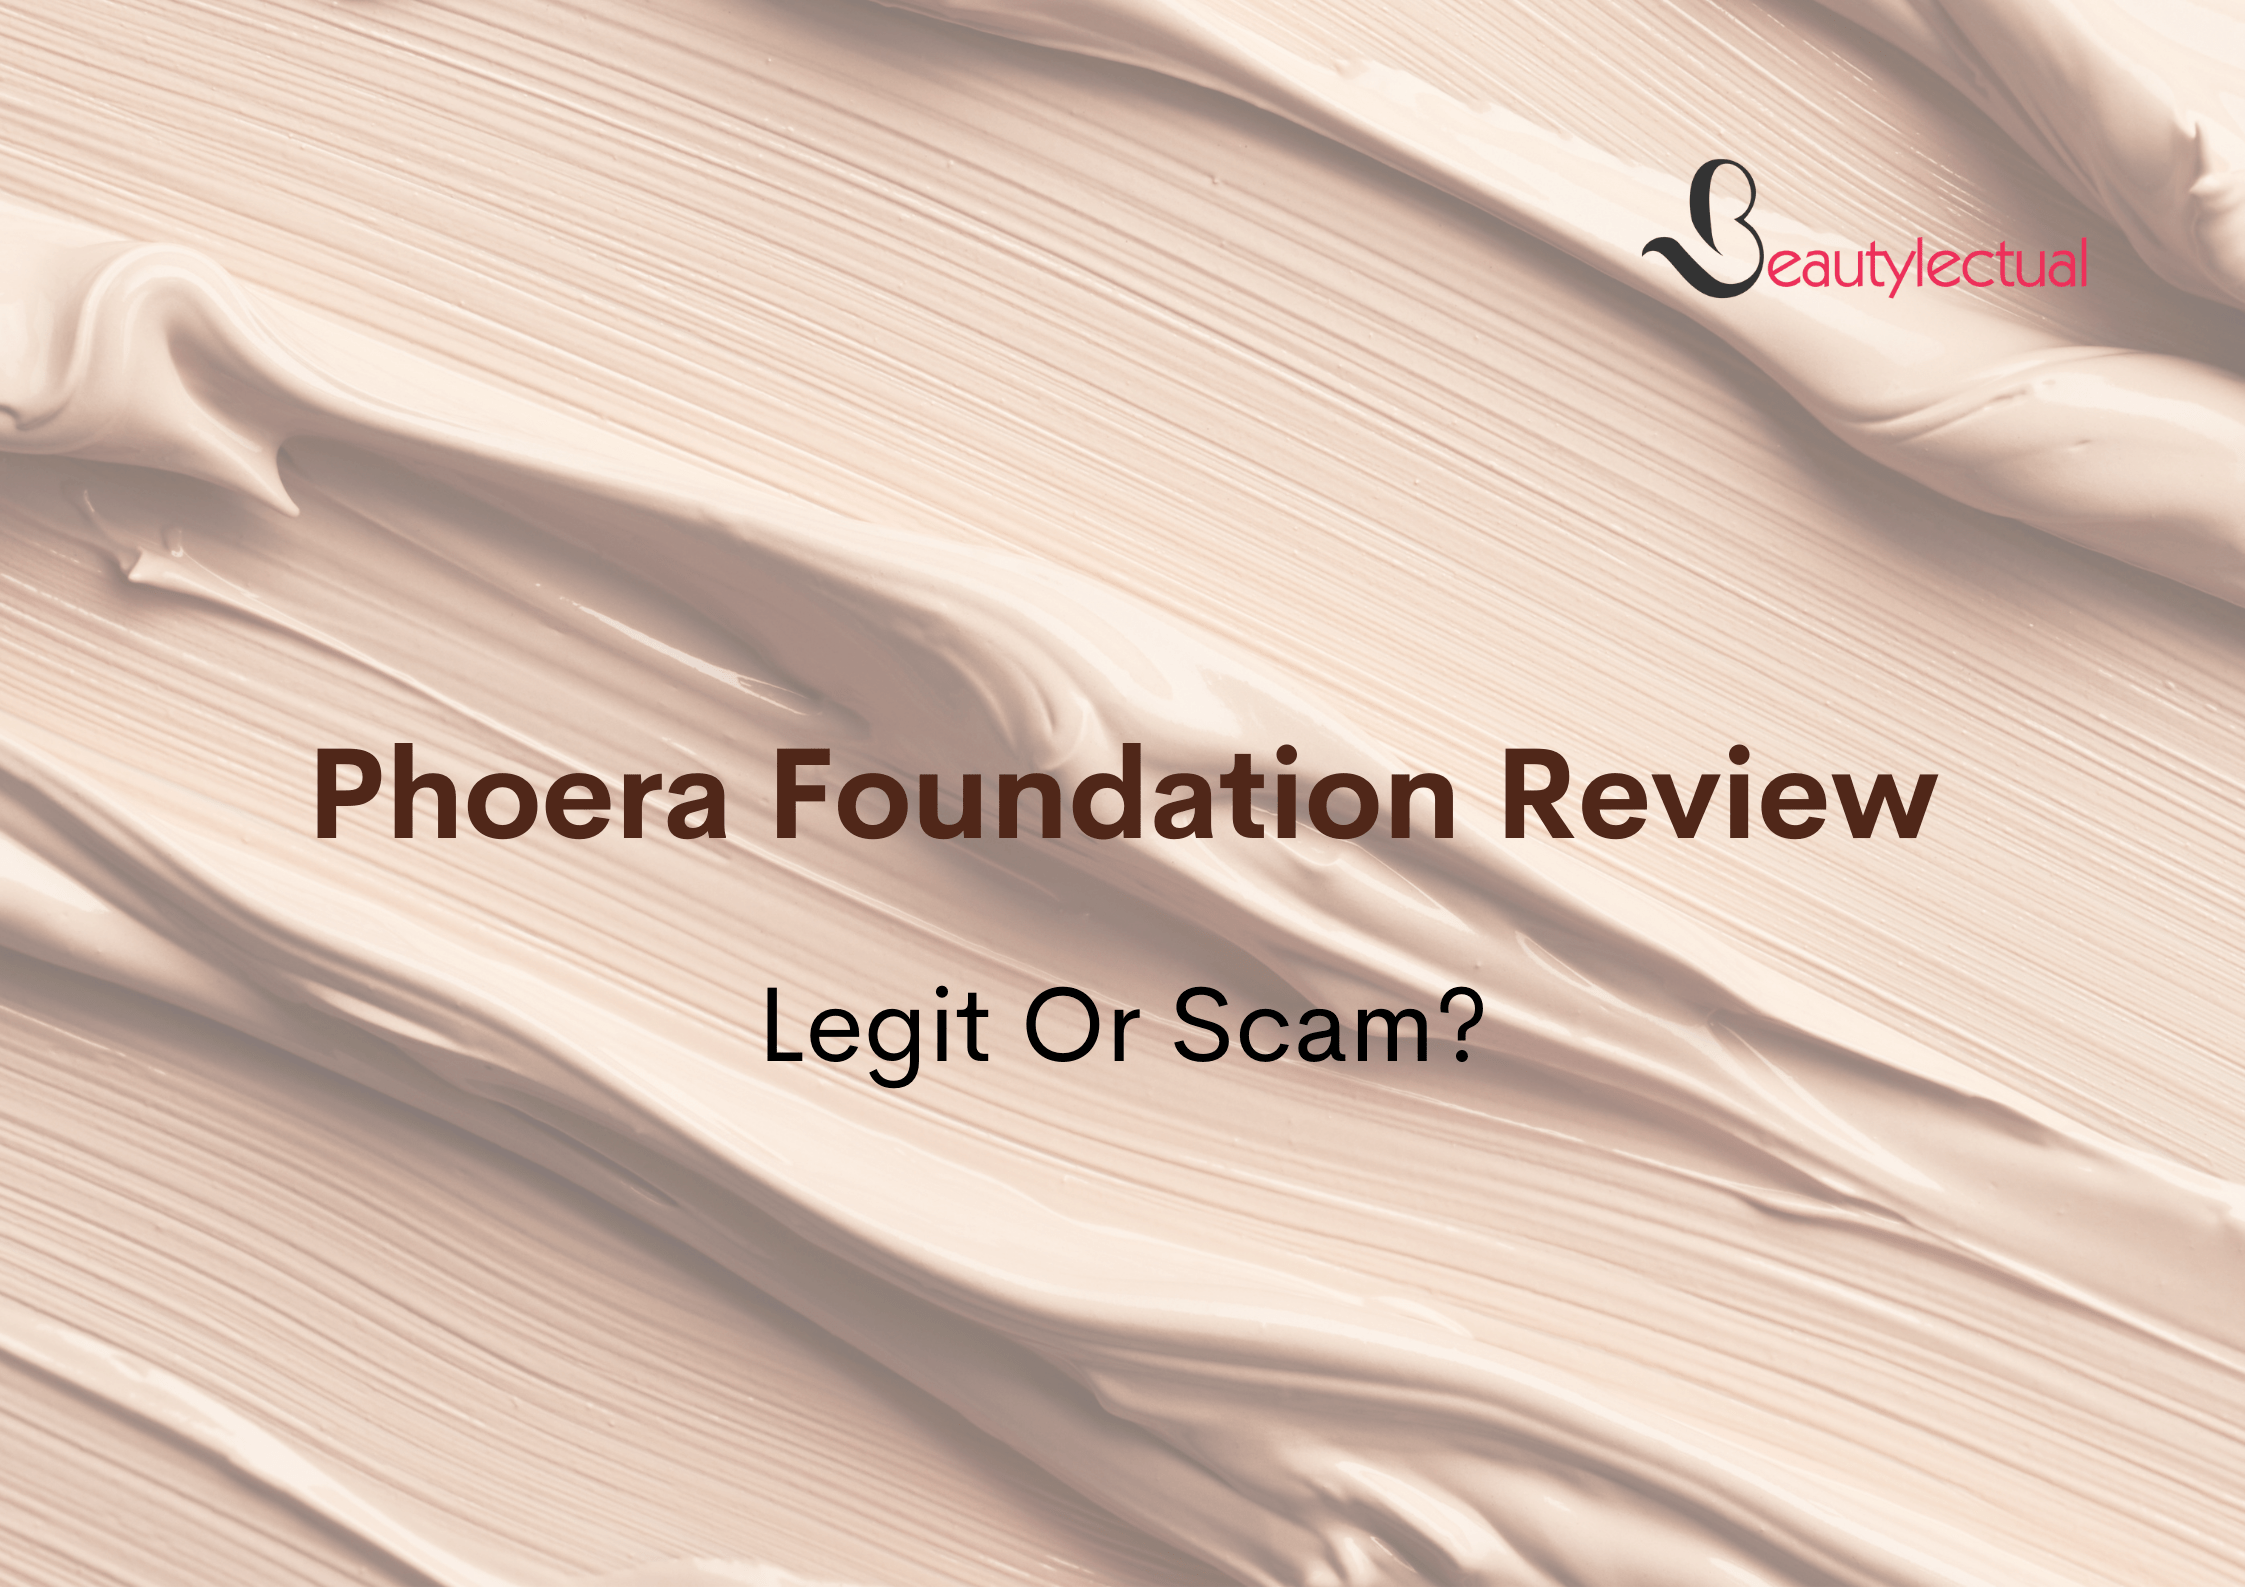 Phoera Foundation Review